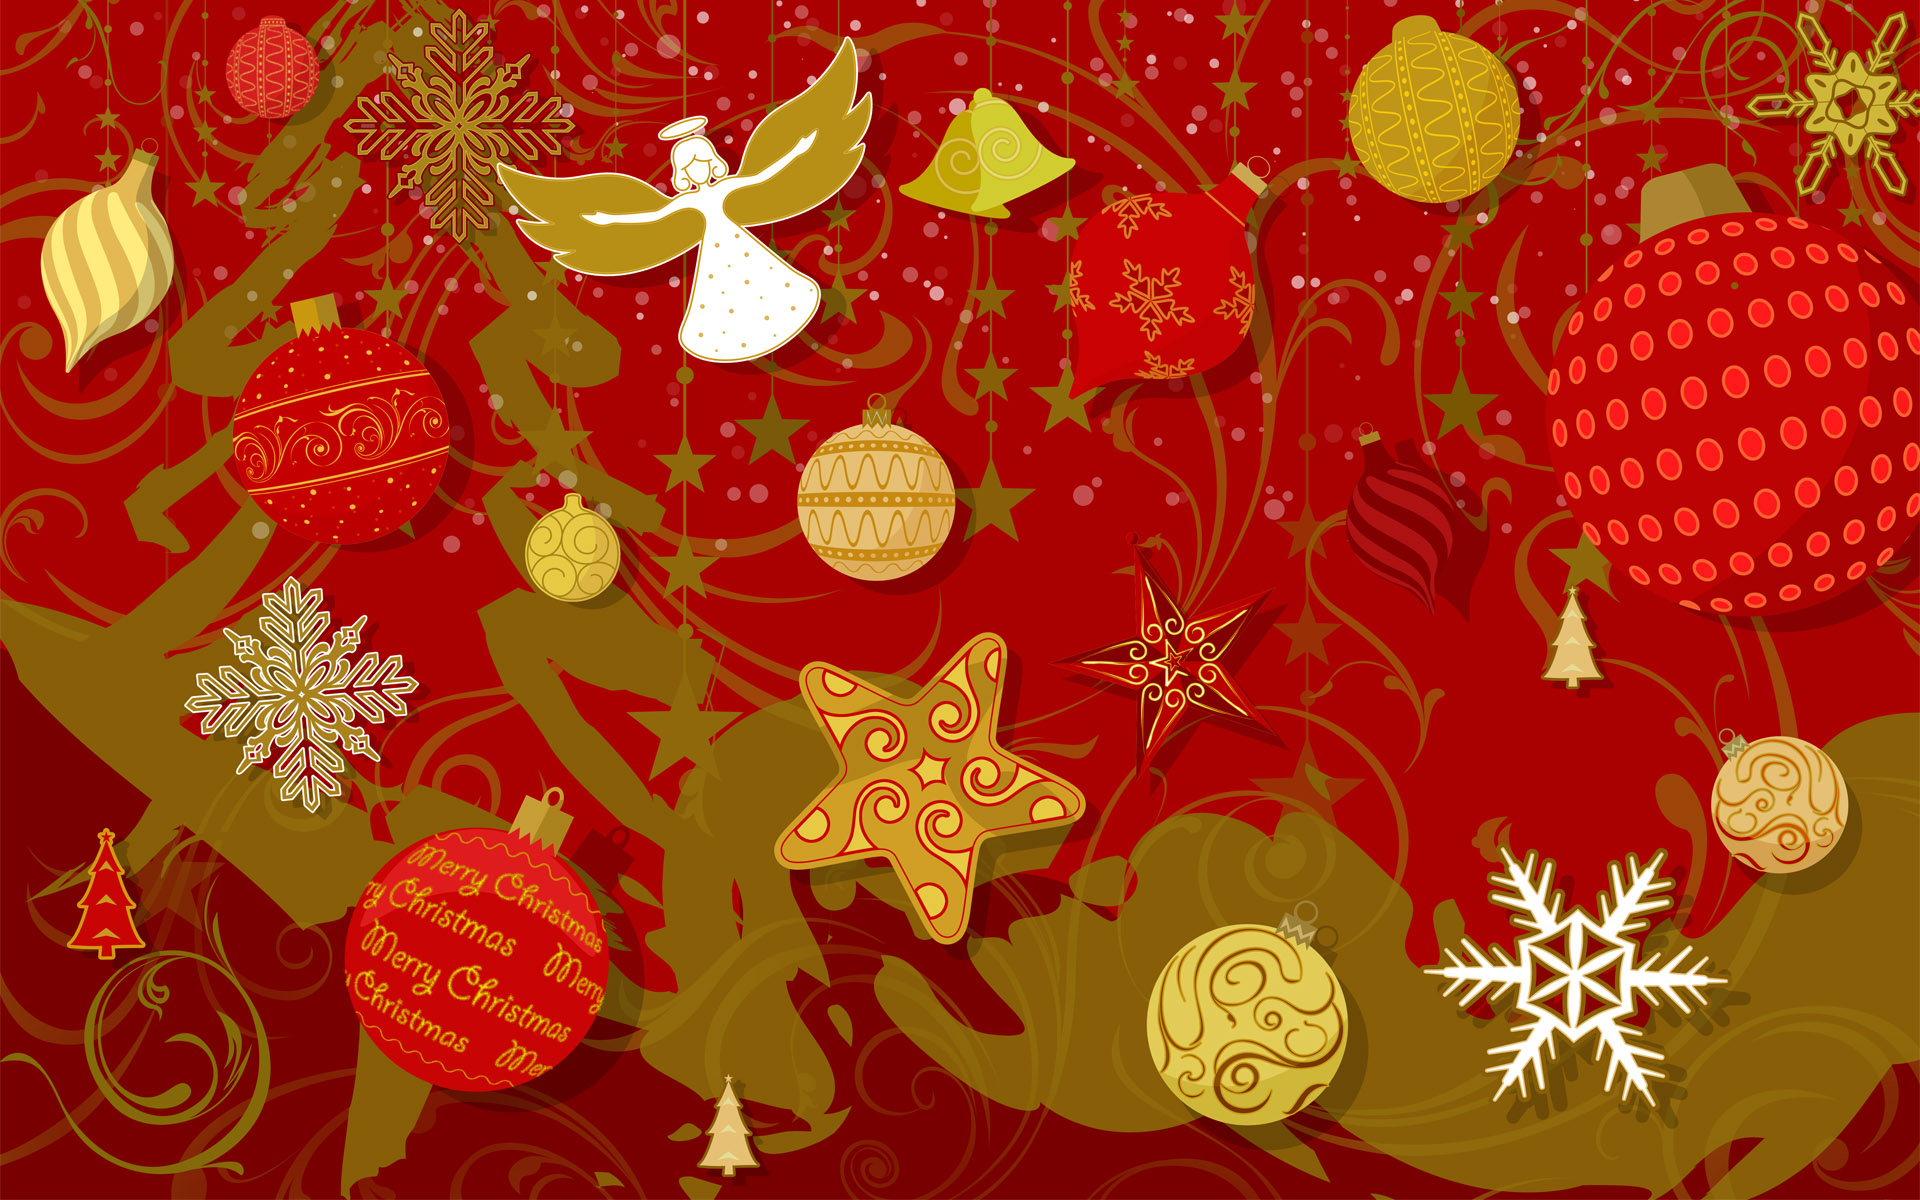 Download Free Christmas Desktop Wallpaper. New Hand-Picked Collection of 